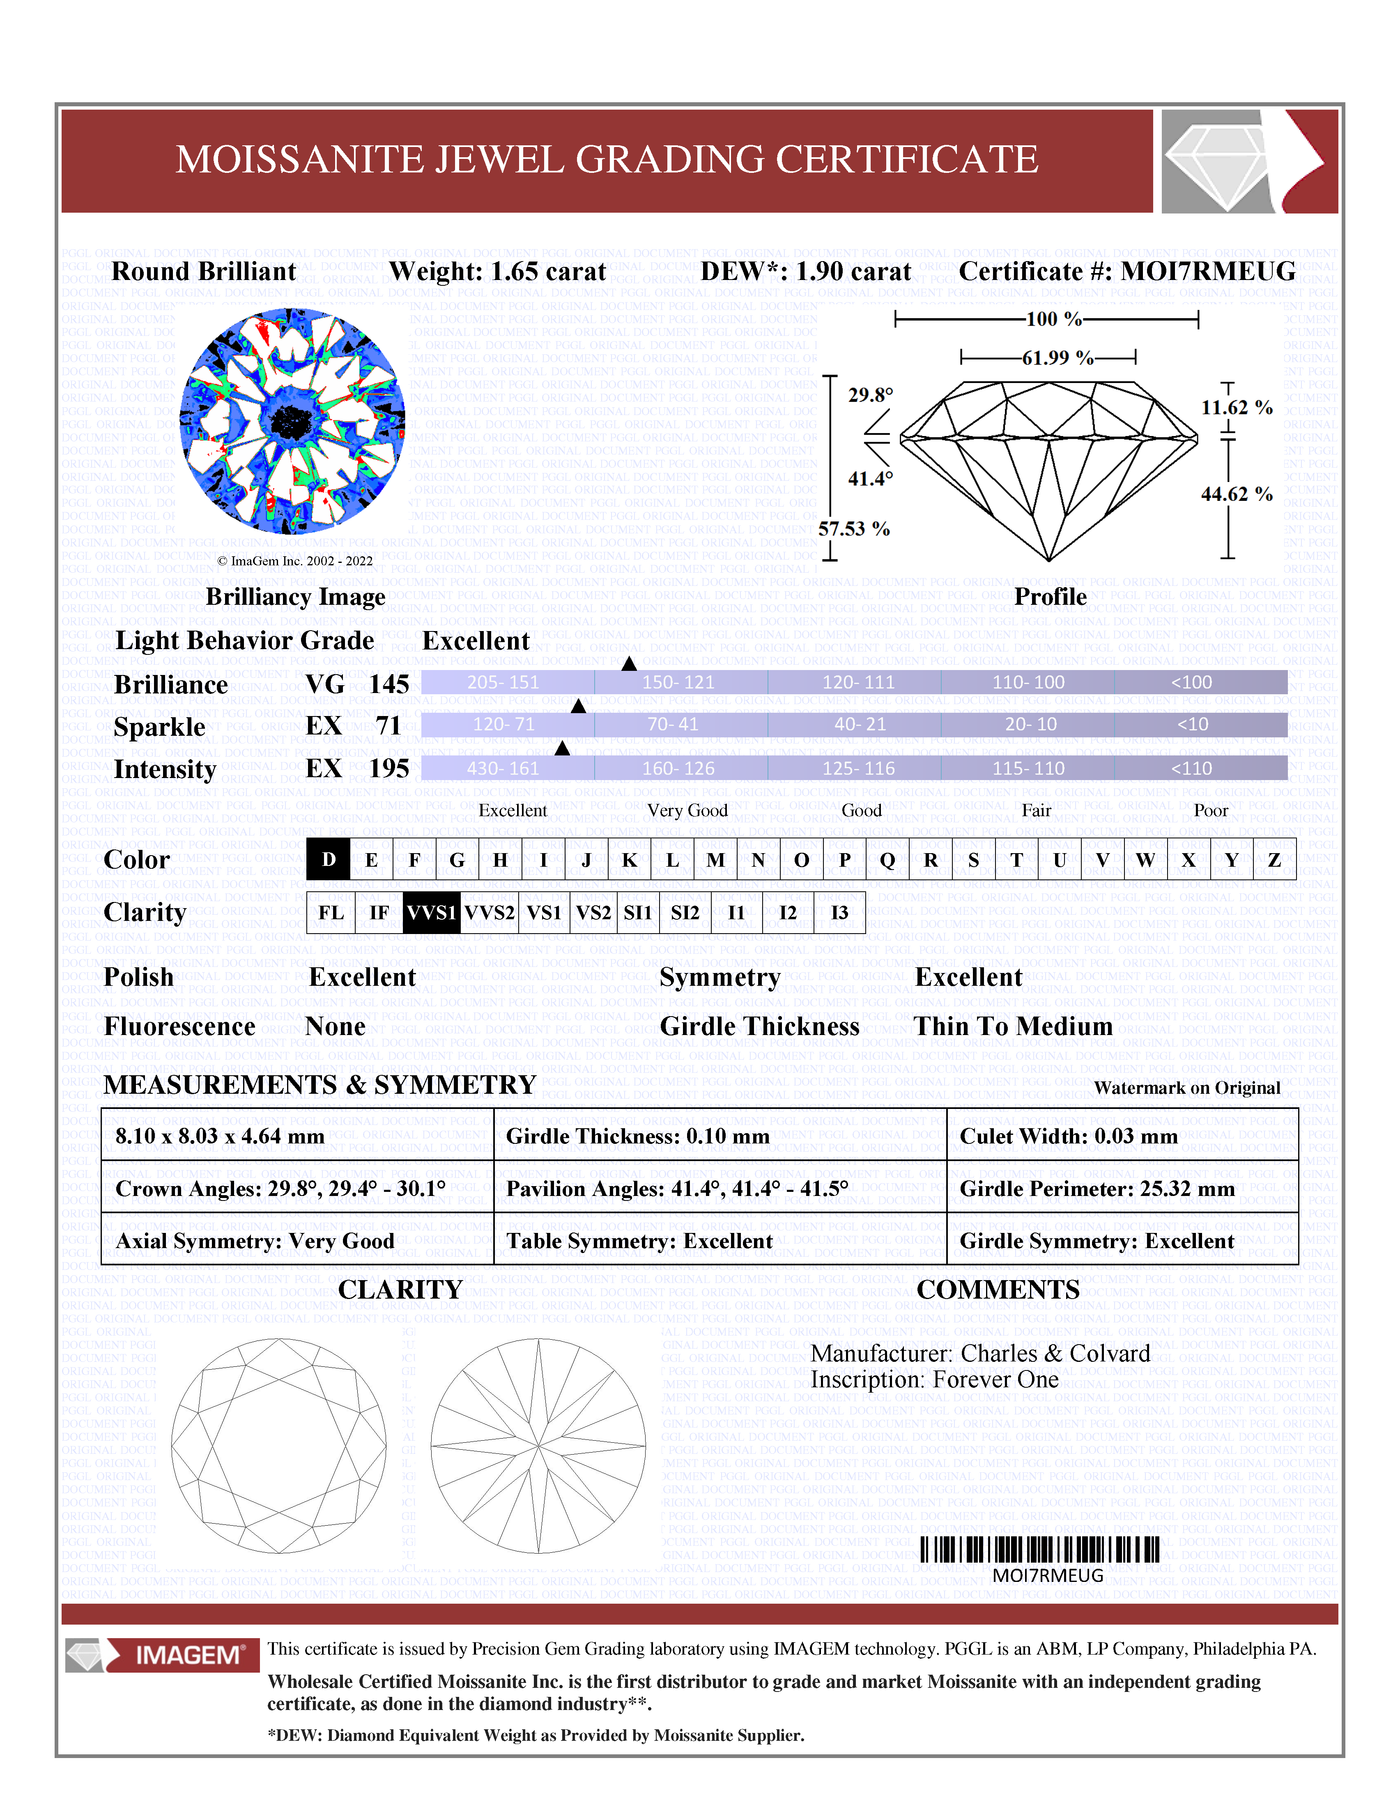 Certified Round Forever One Charles & Colvard Loose Moissanite Stone - 2.00 Carats - D Color - VVS1 Clarity